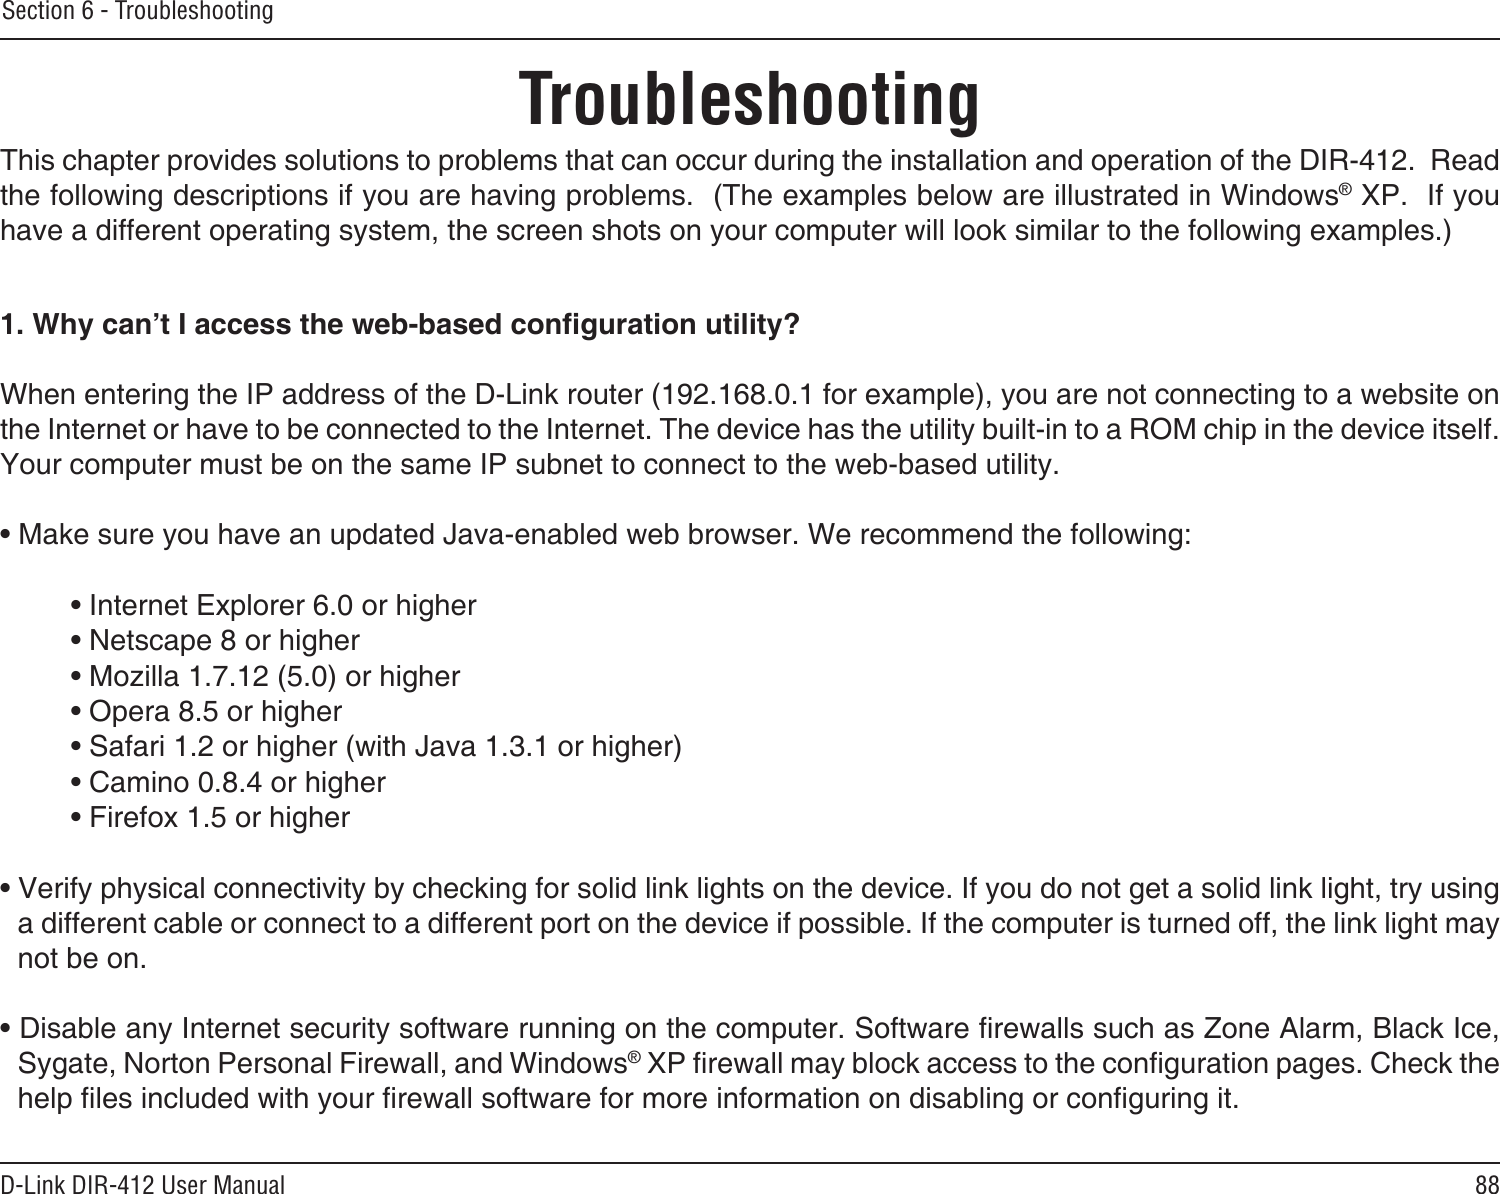 88D-Link DIR-412 User ManualSection 6 - TroubleshootingTroubleshootingThis chapter provides solutions to problems that can occur during the installation and operation of the DIR-412.  Read the following descriptions if you are having problems.  (The examples below are illustrated in Windows® XP.  If you have a different operating system, the screen shots on your computer will look similar to the following examples.)1. Why can’t I access the web-based conguration utility?When entering the IP address of the D-Link router (192.168.0.1 for example), you are not connecting to a website on the Internet or have to be connected to the Internet. The device has the utility built-in to a ROM chip in the device itself. Your computer must be on the same IP subnet to connect to the web-based utility. • Make sure you have an updated Java-enabled web browser. We recommend the following: • Internet Explorer 6.0 or higher • Netscape 8 or higher • Mozilla 1.7.12 (5.0) or higher • Opera 8.5 or higher • Safari 1.2 or higher (with Java 1.3.1 or higher) • Camino 0.8.4 or higher • Firefox 1.5 or higher • Verify physical connectivity by checking for solid link lights on the device. If you do not get a solid link light, try using a different cable or connect to a different port on the device if possible. If the computer is turned off, the link light may not be on.• Disable any Internet security software running on the computer. Software rewalls such as Zone Alarm, Black Ice, Sygate, Norton Personal Firewall, and Windows® XP rewall may block access to the conguration pages. Check the help les included with your rewall software for more information on disabling or conguring it.